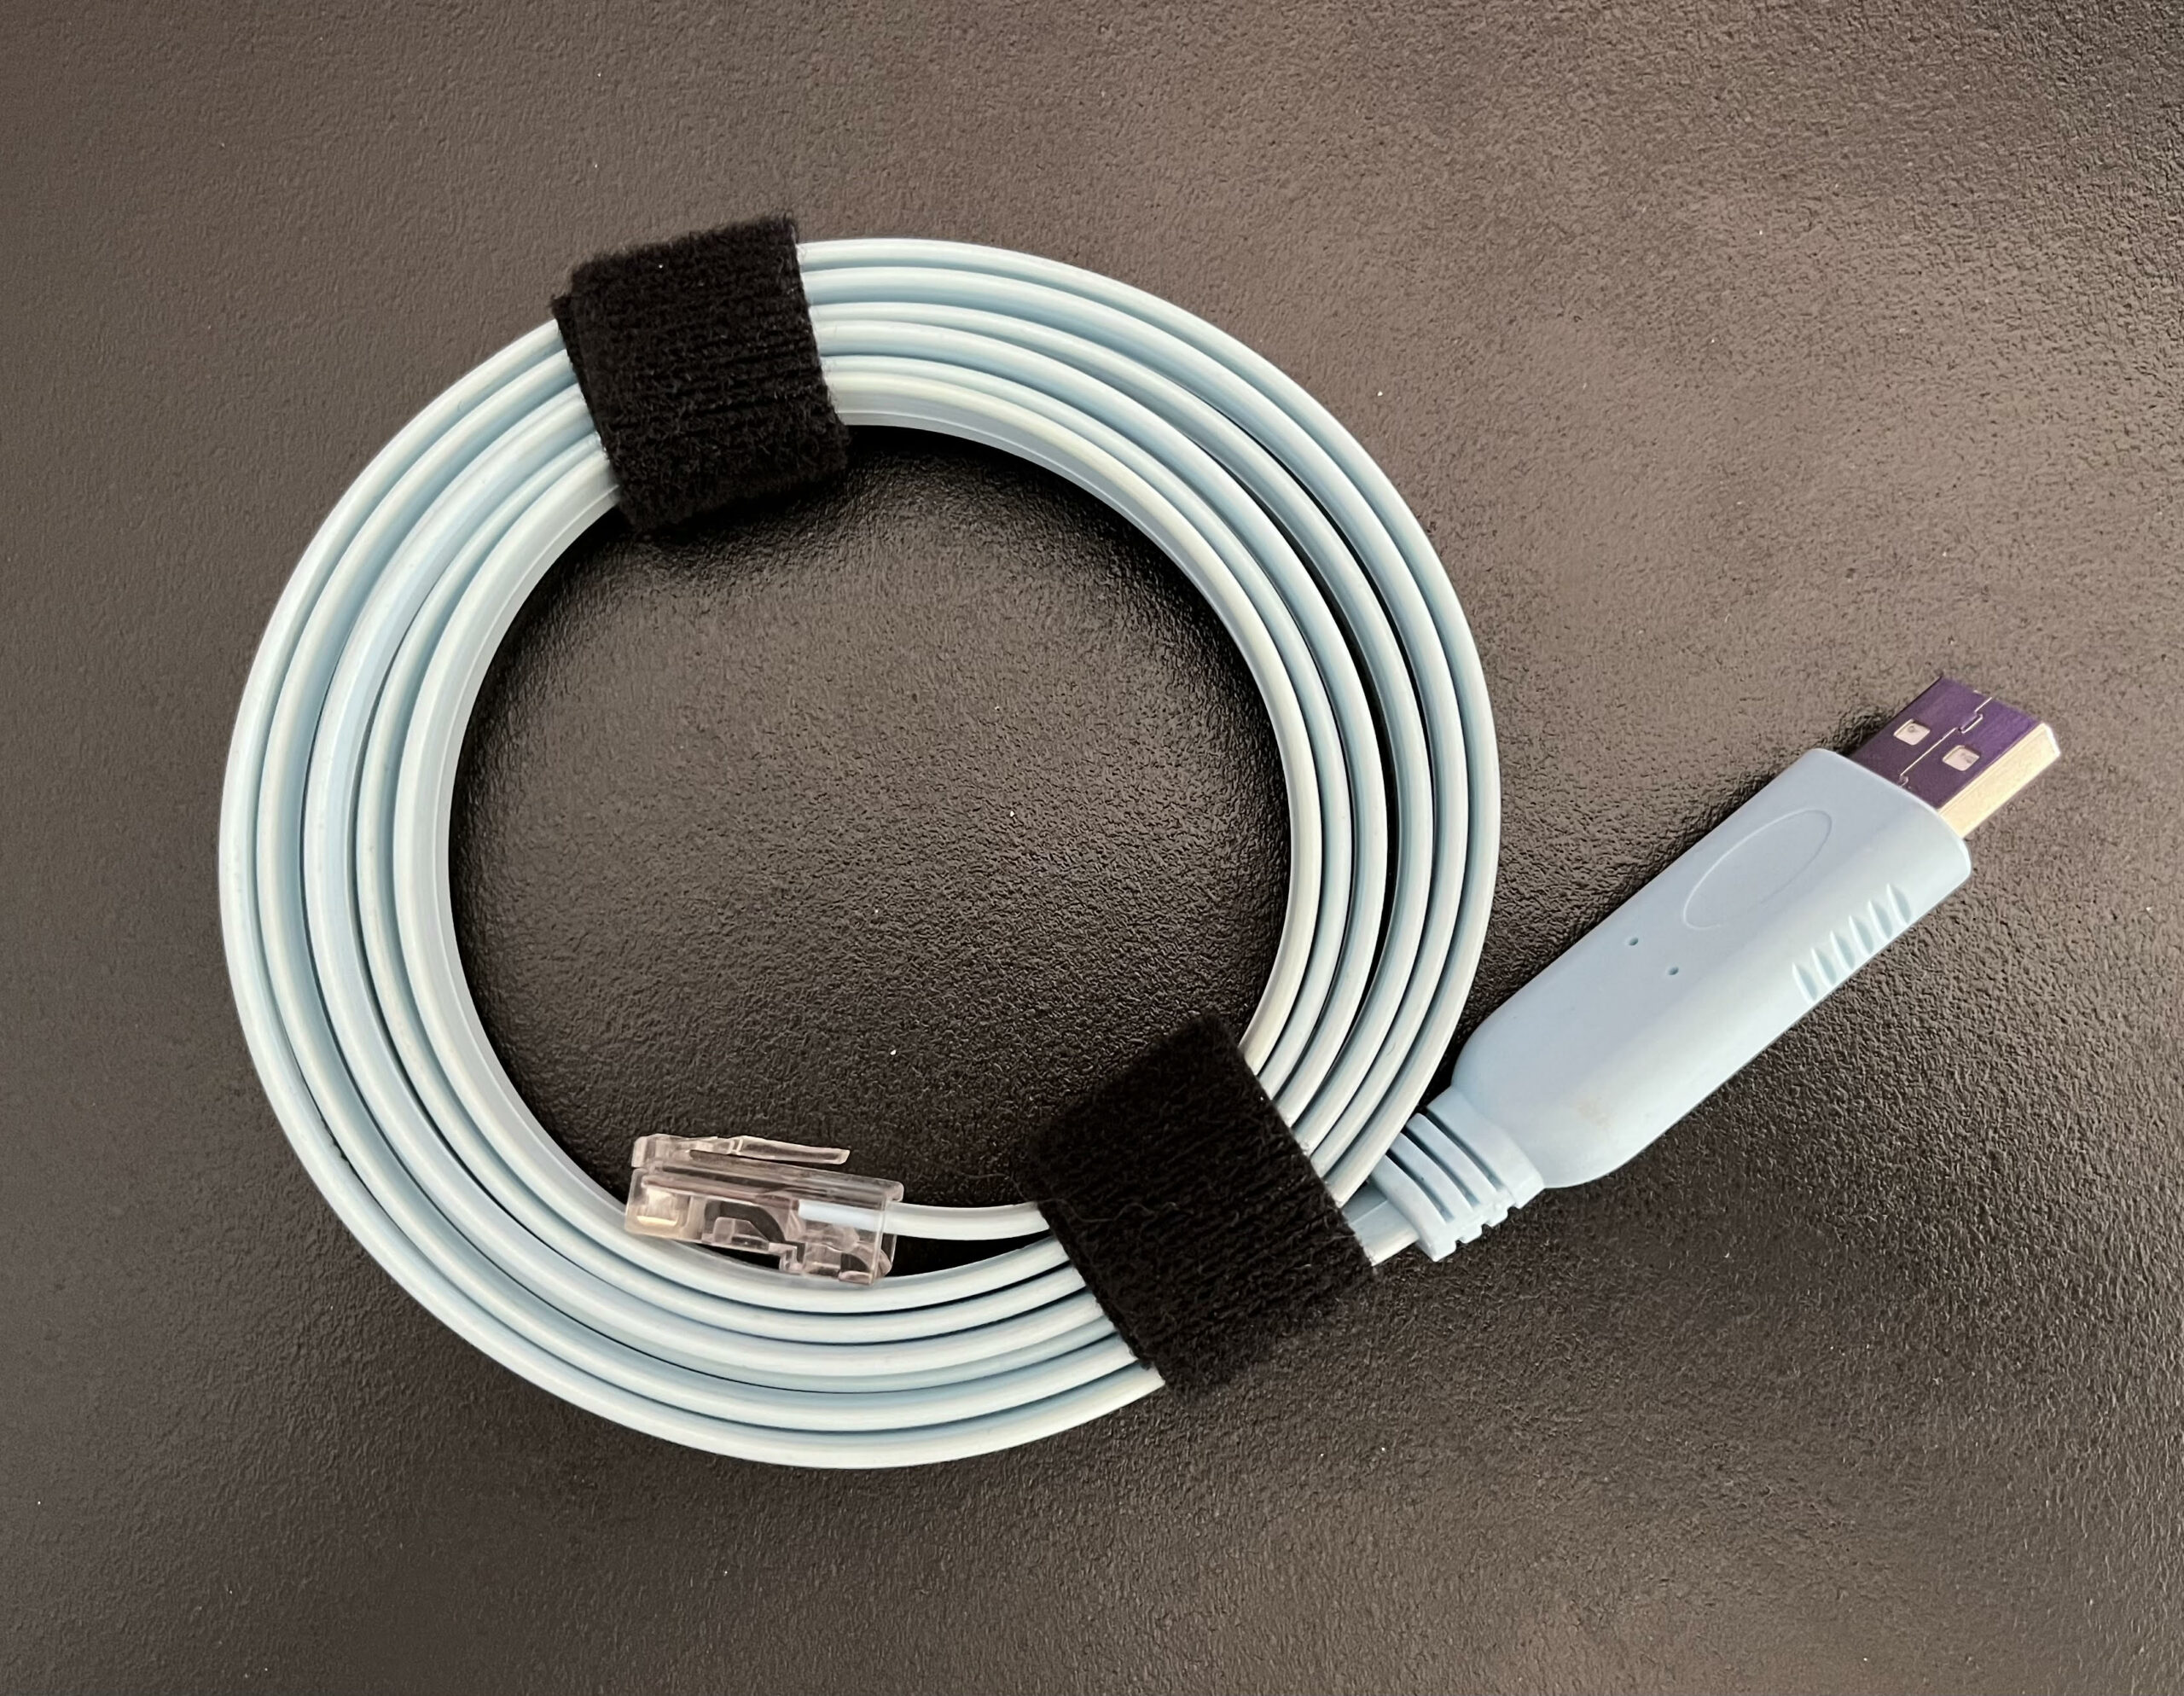 USB Console Cable, USB to RJ45 Cable